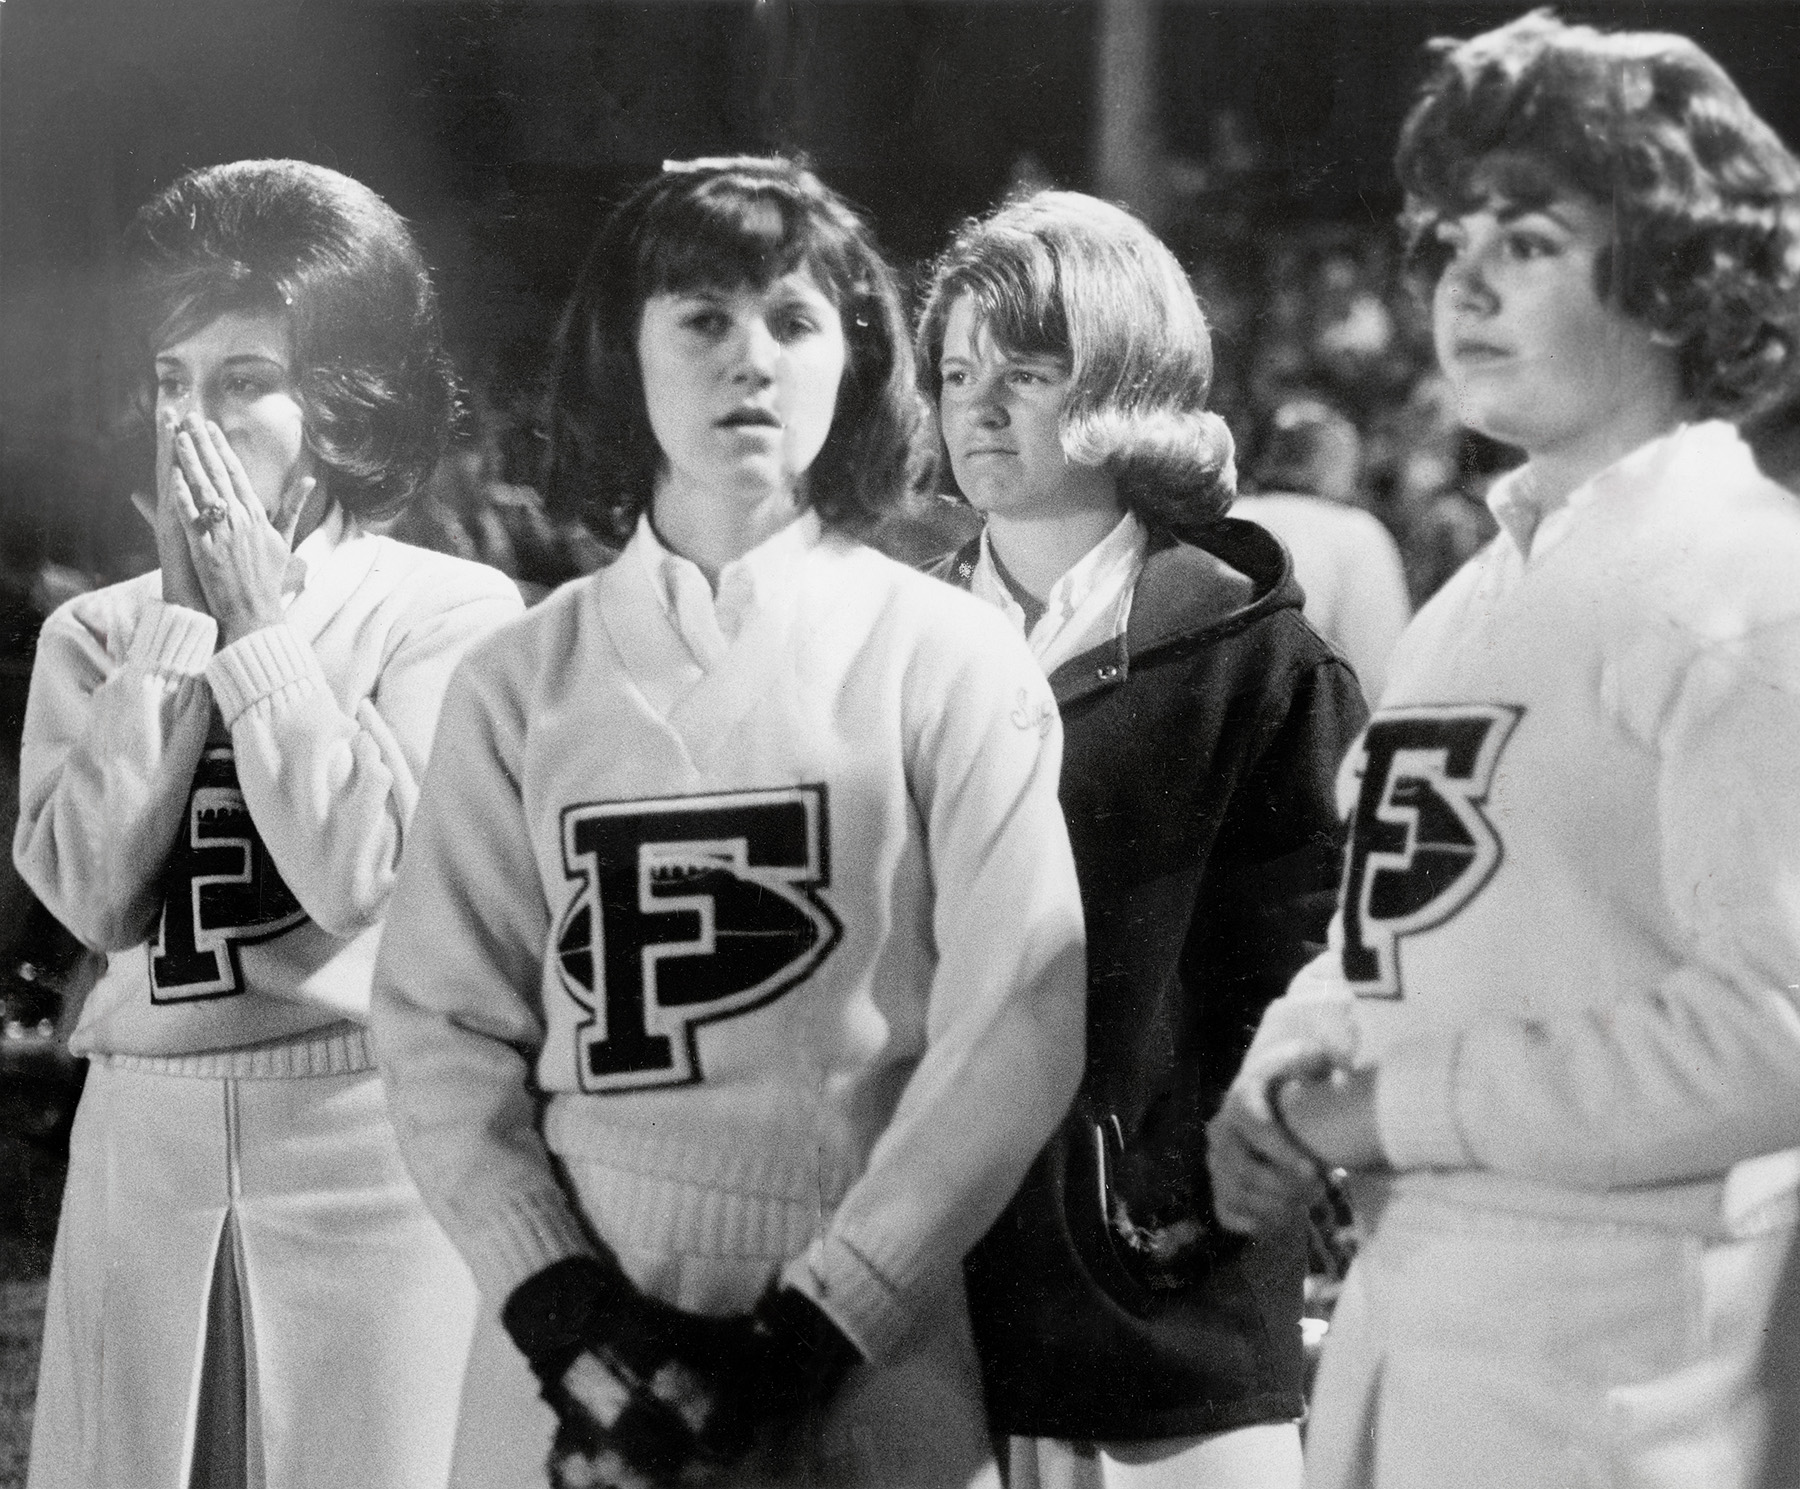 Fairmont West H.S. Cheerleaders, 1963 (Fairmont_03) | Out of the Box